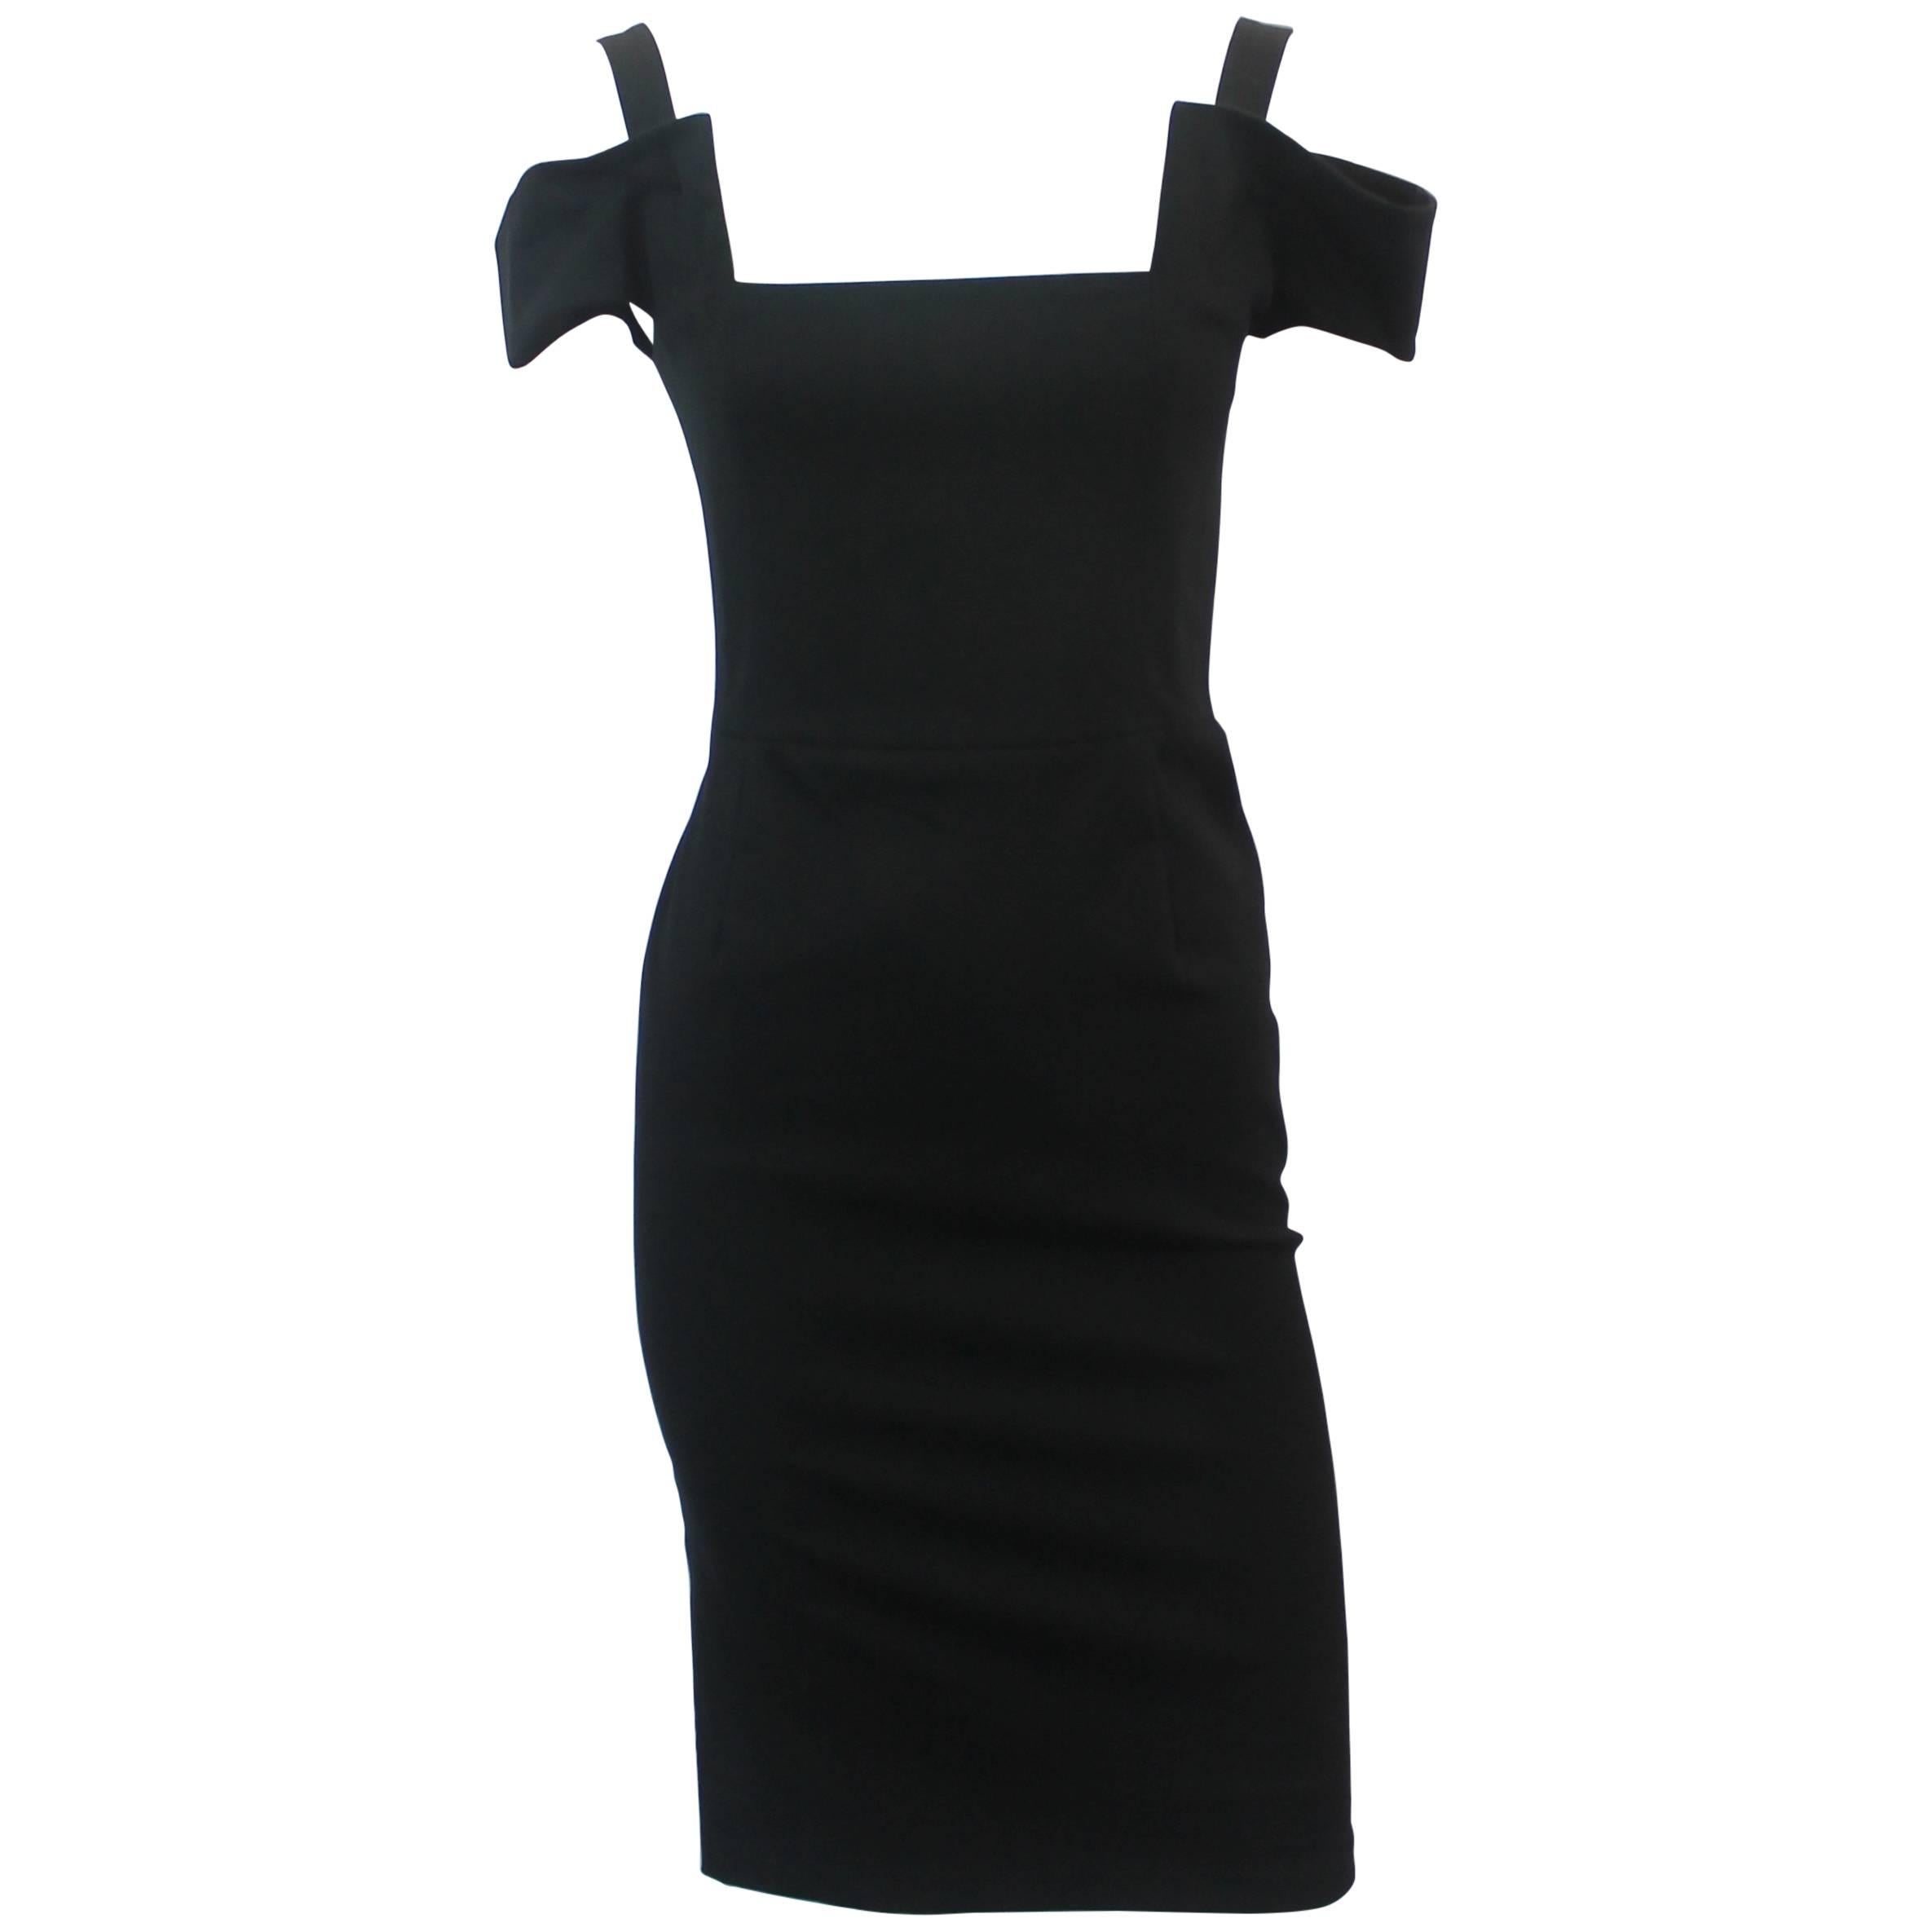 Fendi Black Cotton Blend Tapered Dress with Cutouts - 40 For Sale